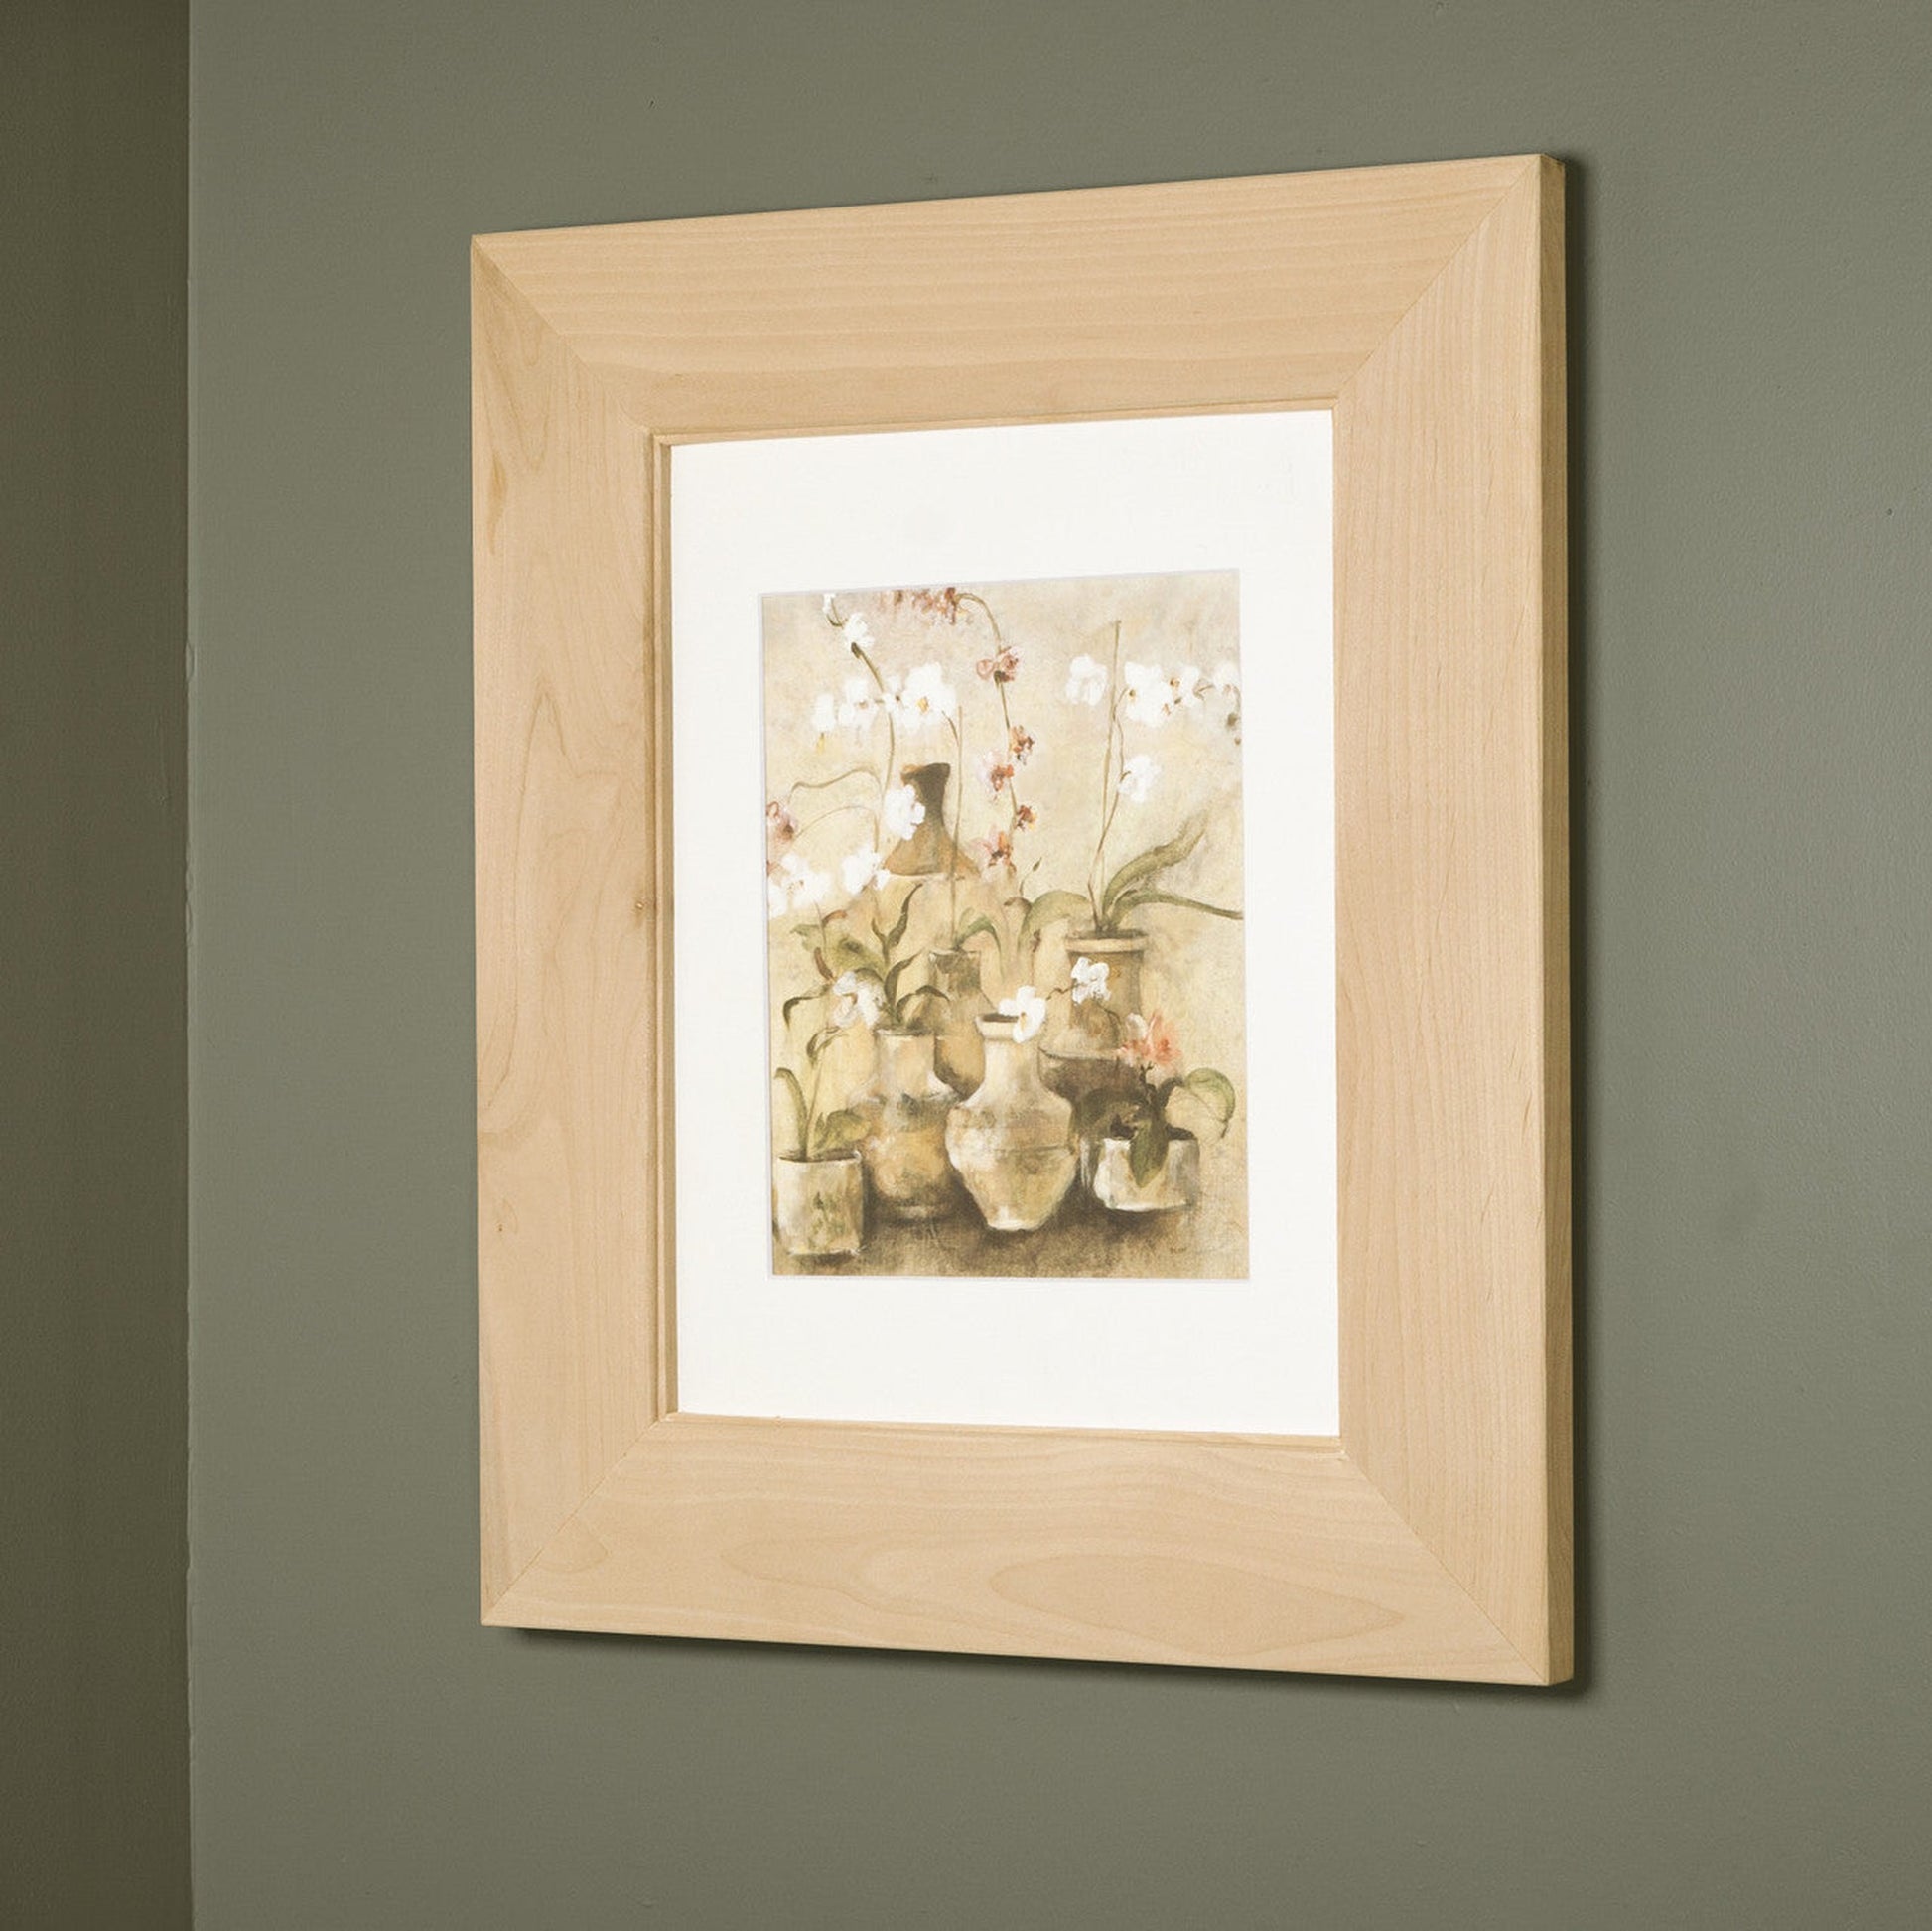 Fox Hollow Furnishings 14" x 16" Regular Unfinished Special 3" Depth Recessed Picture Frame Medicine Cabinet